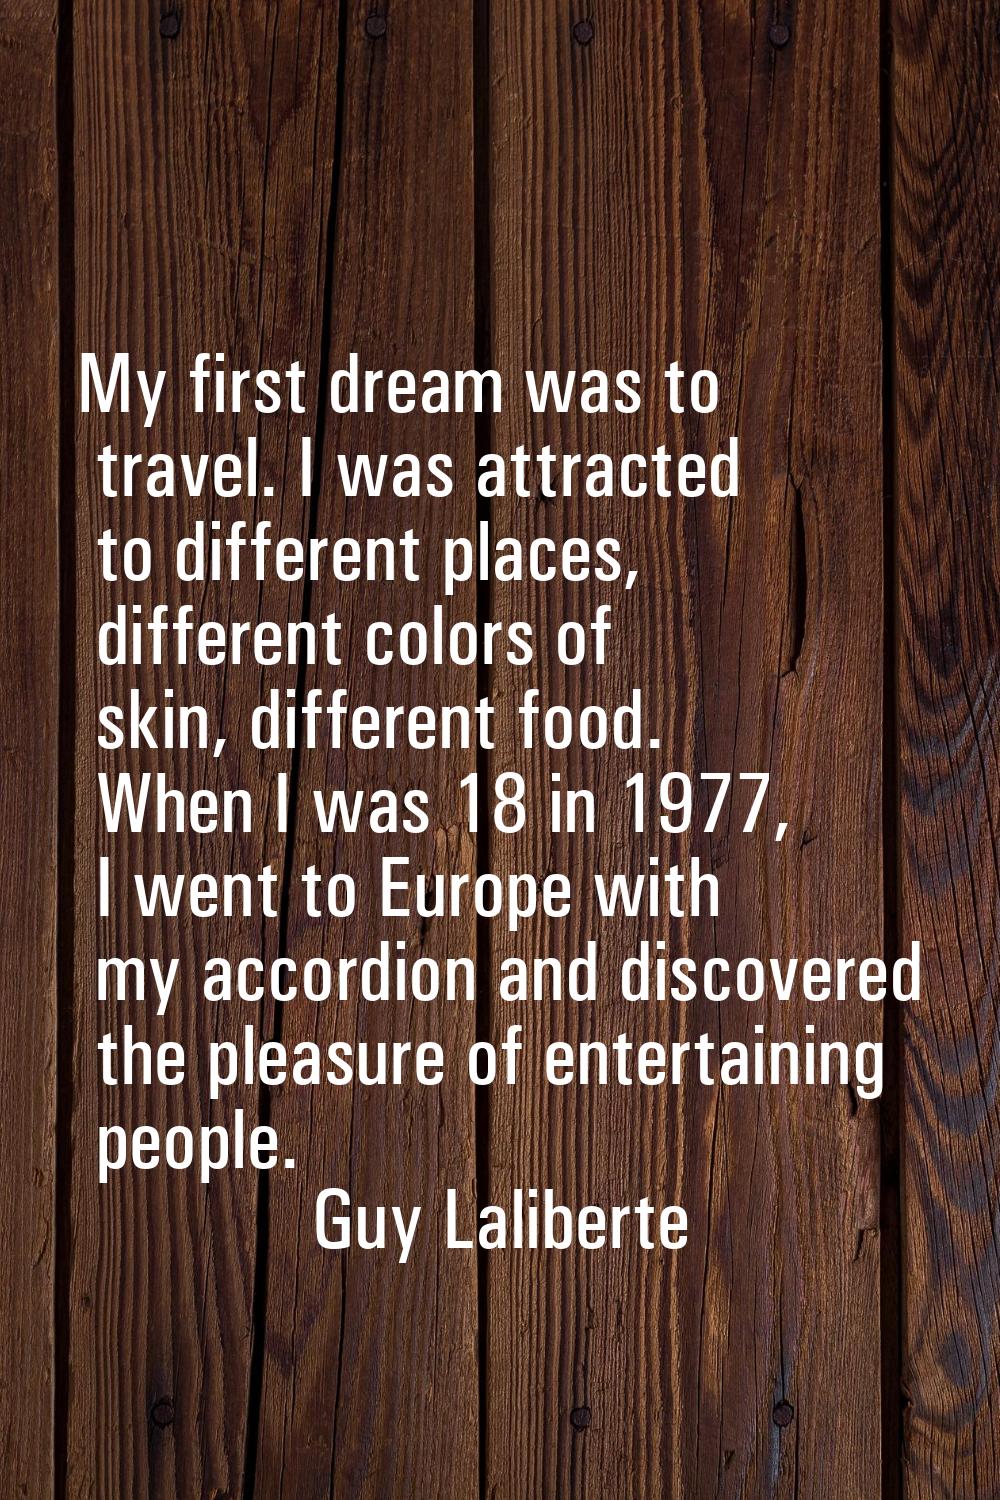 My first dream was to travel. I was attracted to different places, different colors of skin, differ